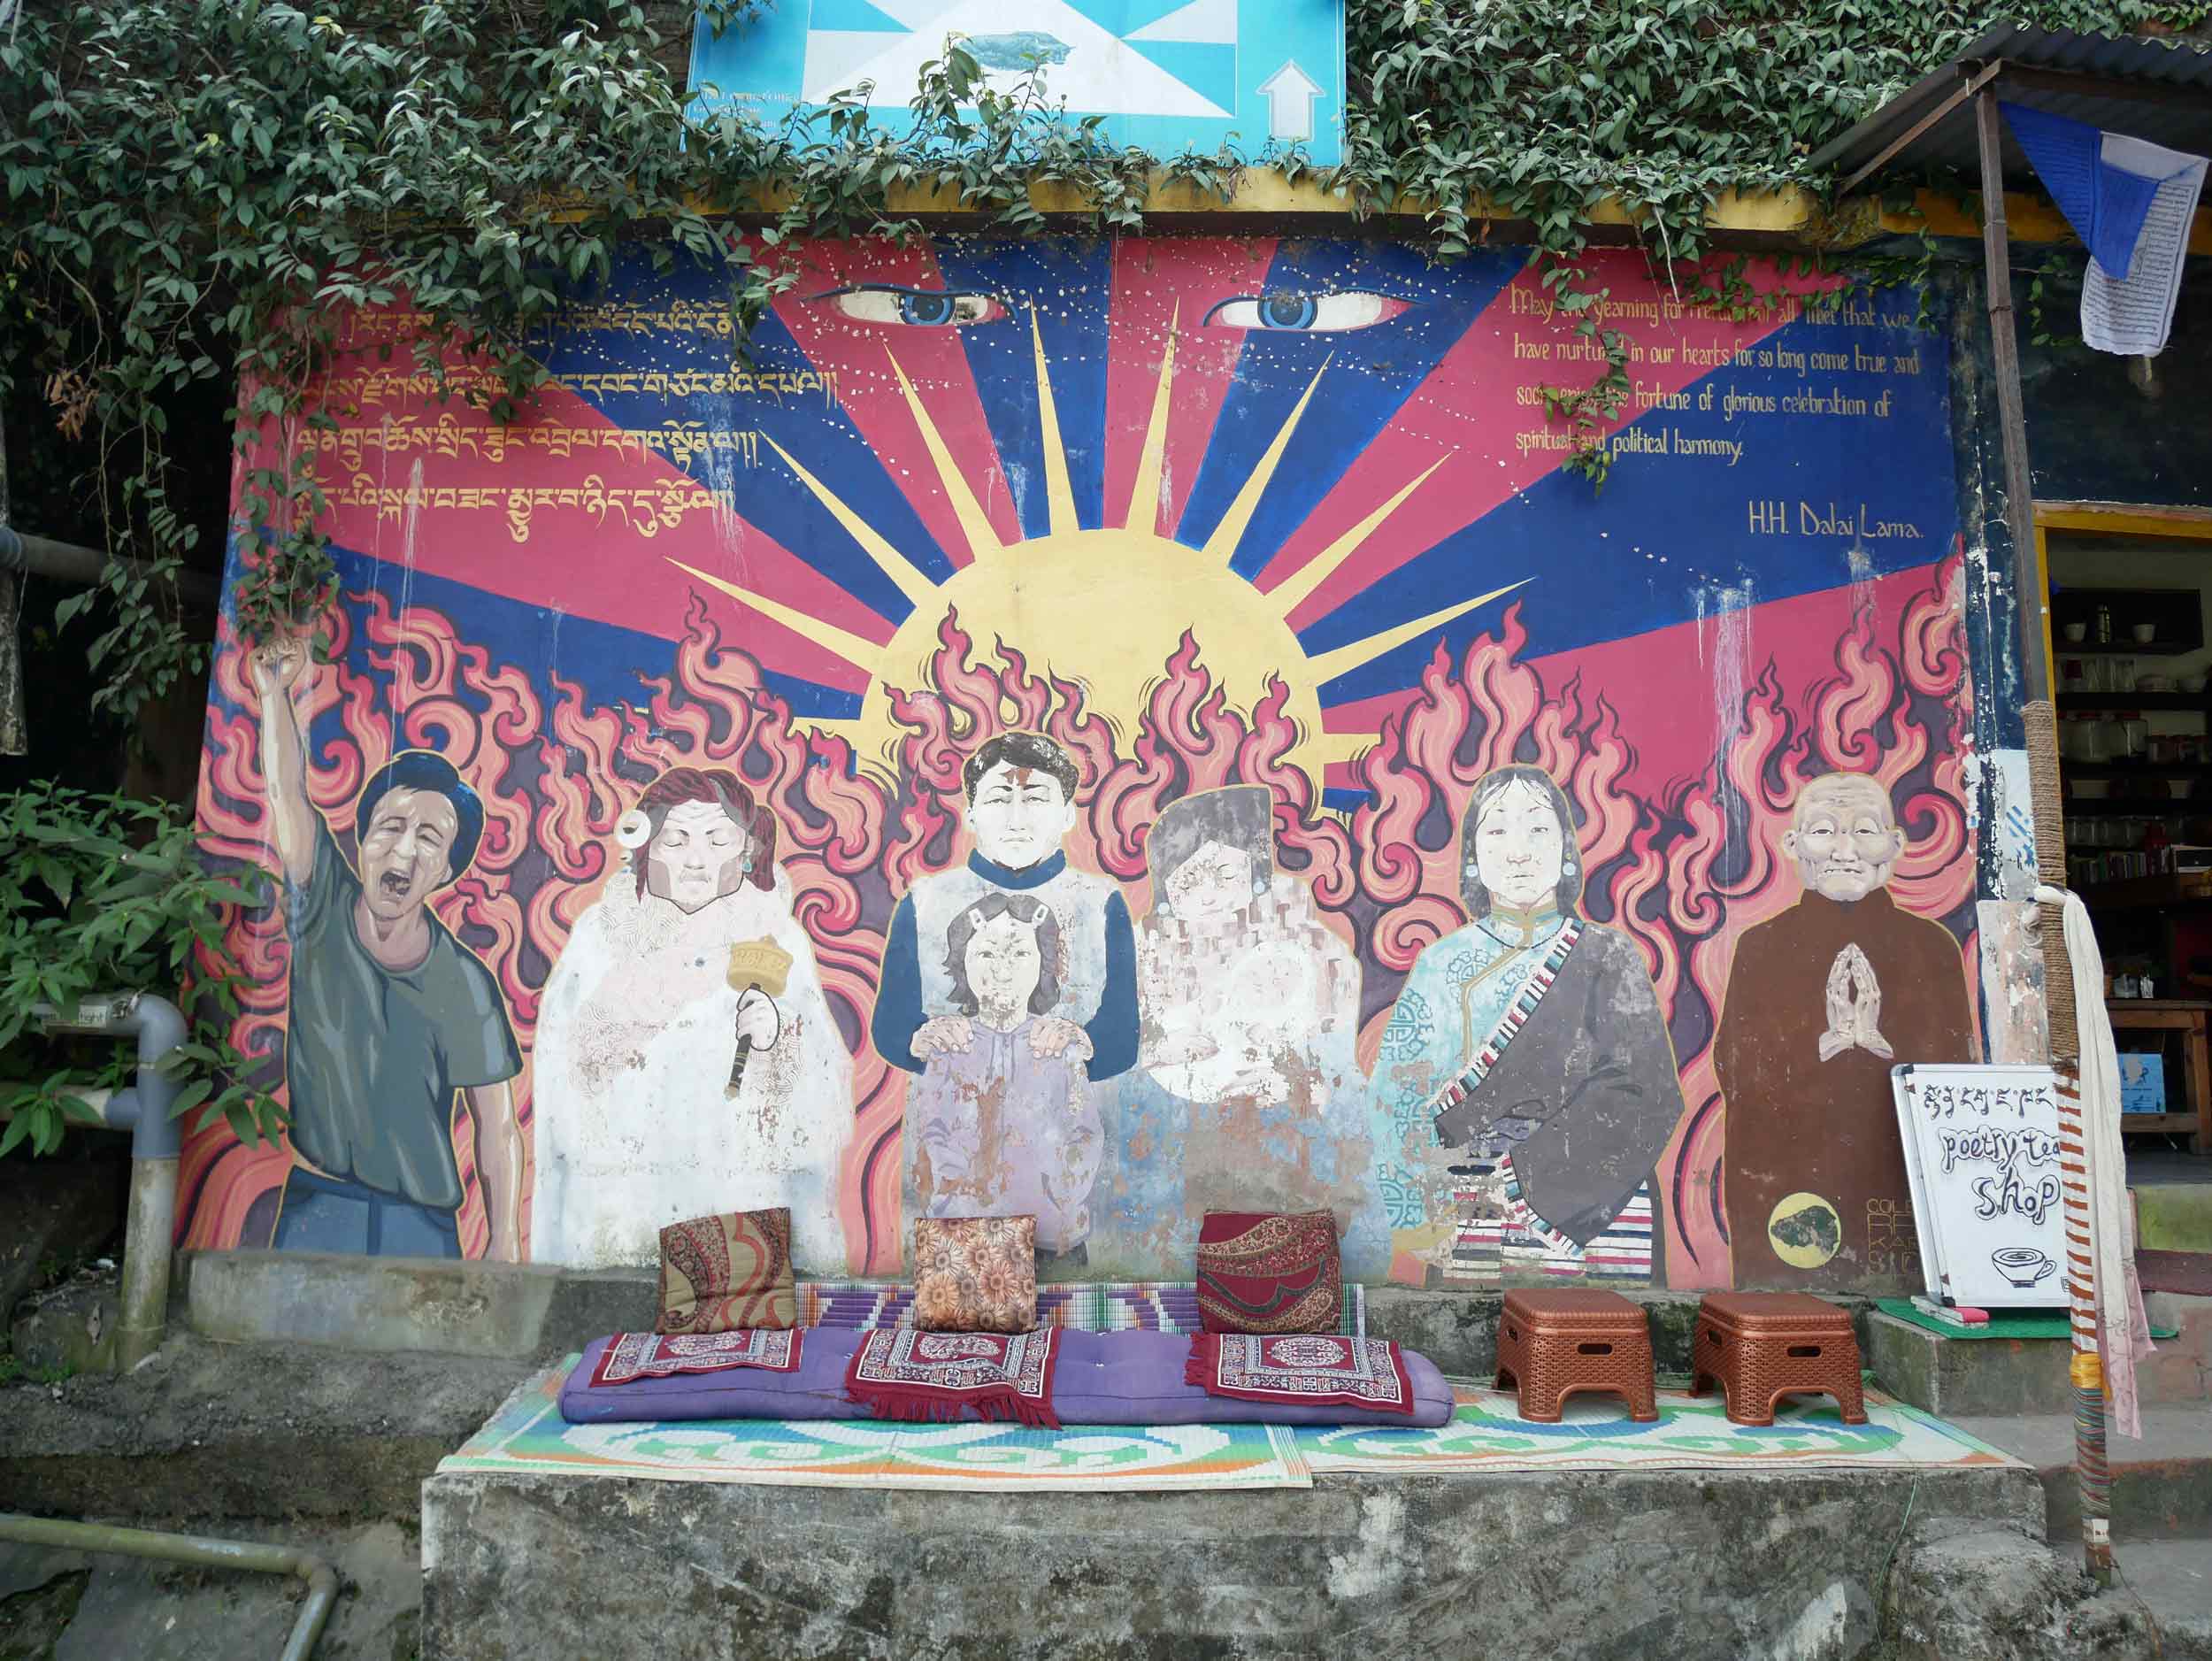  McLeod Ganj is the residence-in-exhile for Tiben refugees, including His Holiness, the Dalai Lama (Nov 2). 